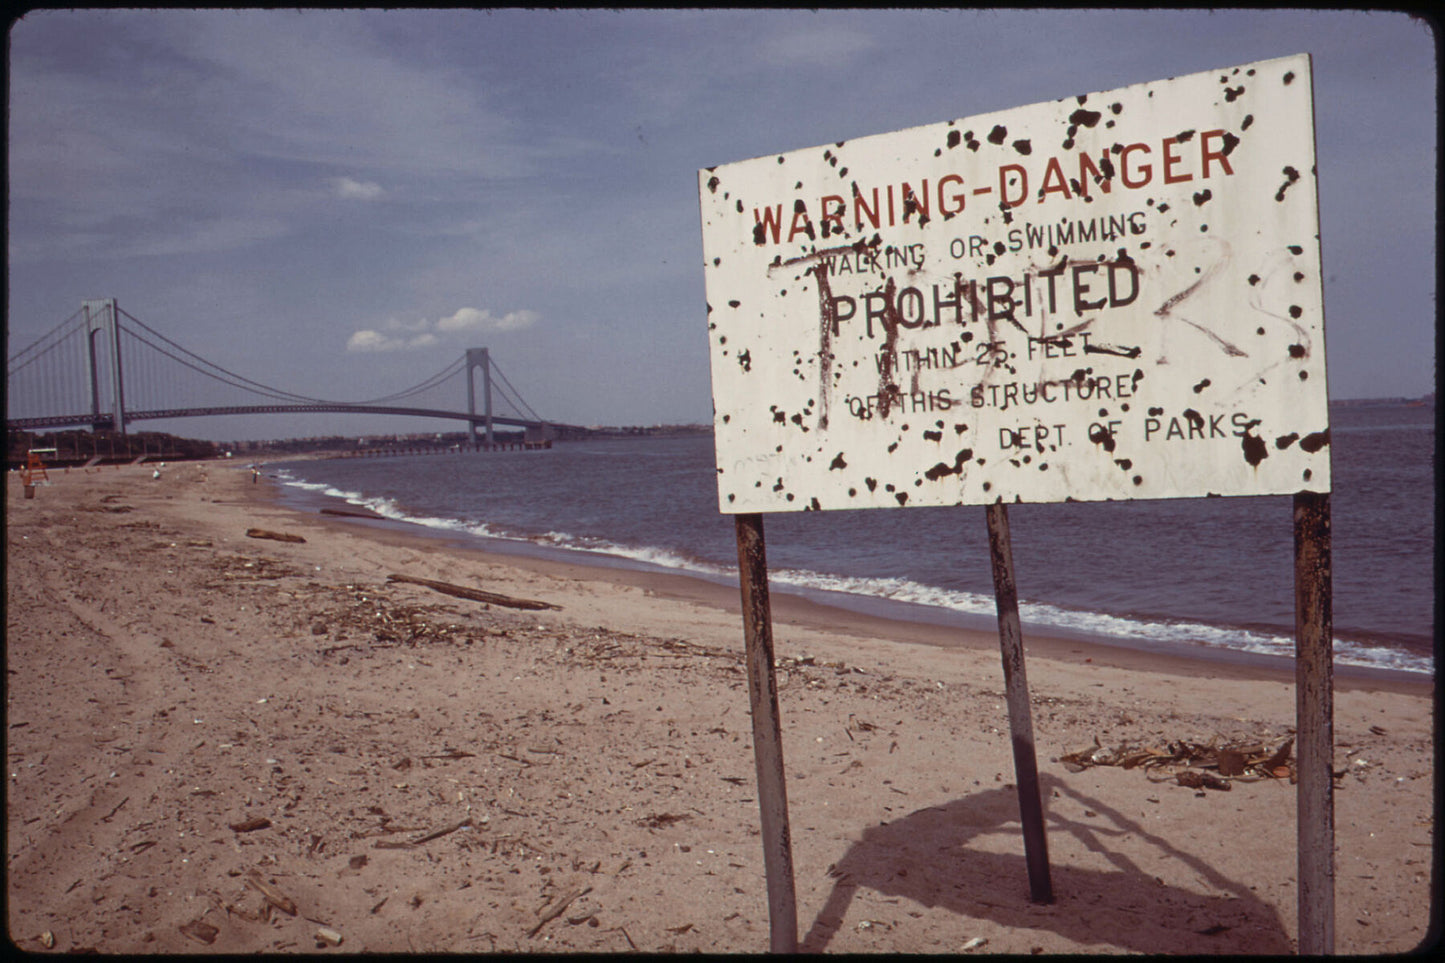 Warning of Polluted Water at Staten Island by Arthur Tress - 1973